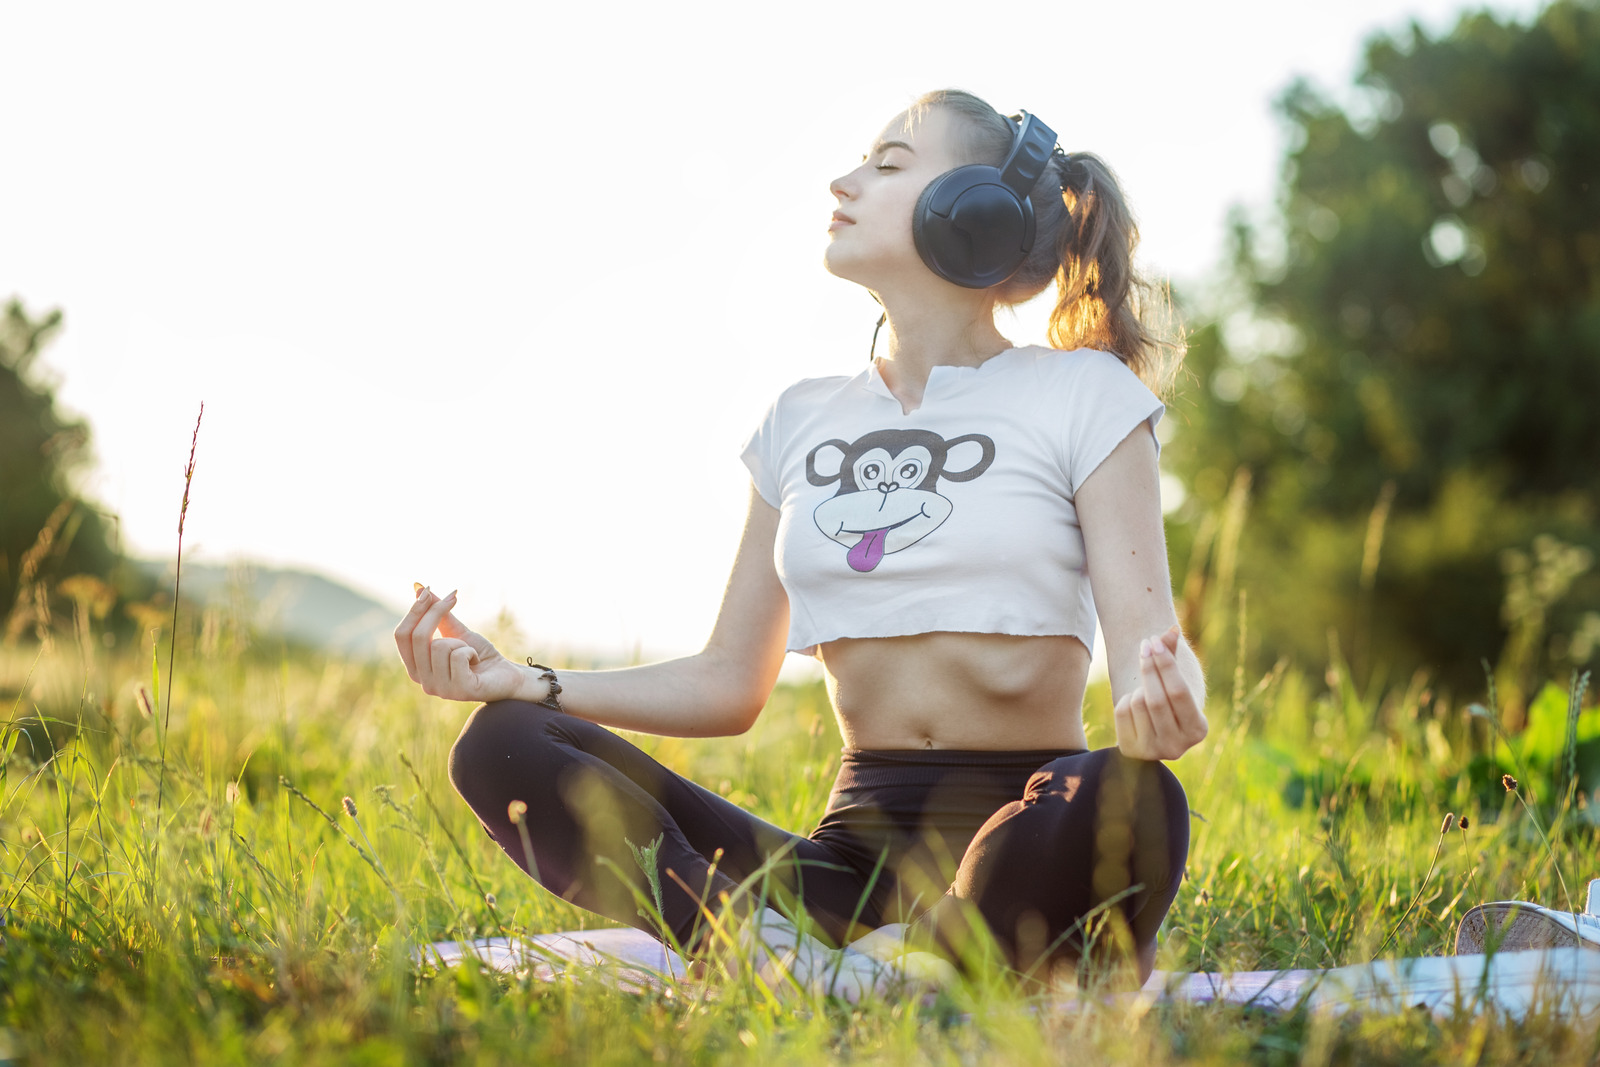 The girl listens to music on headphones. A woman is meditating. The combination of nature and man. Concept for lifestyle, music, relaxation.